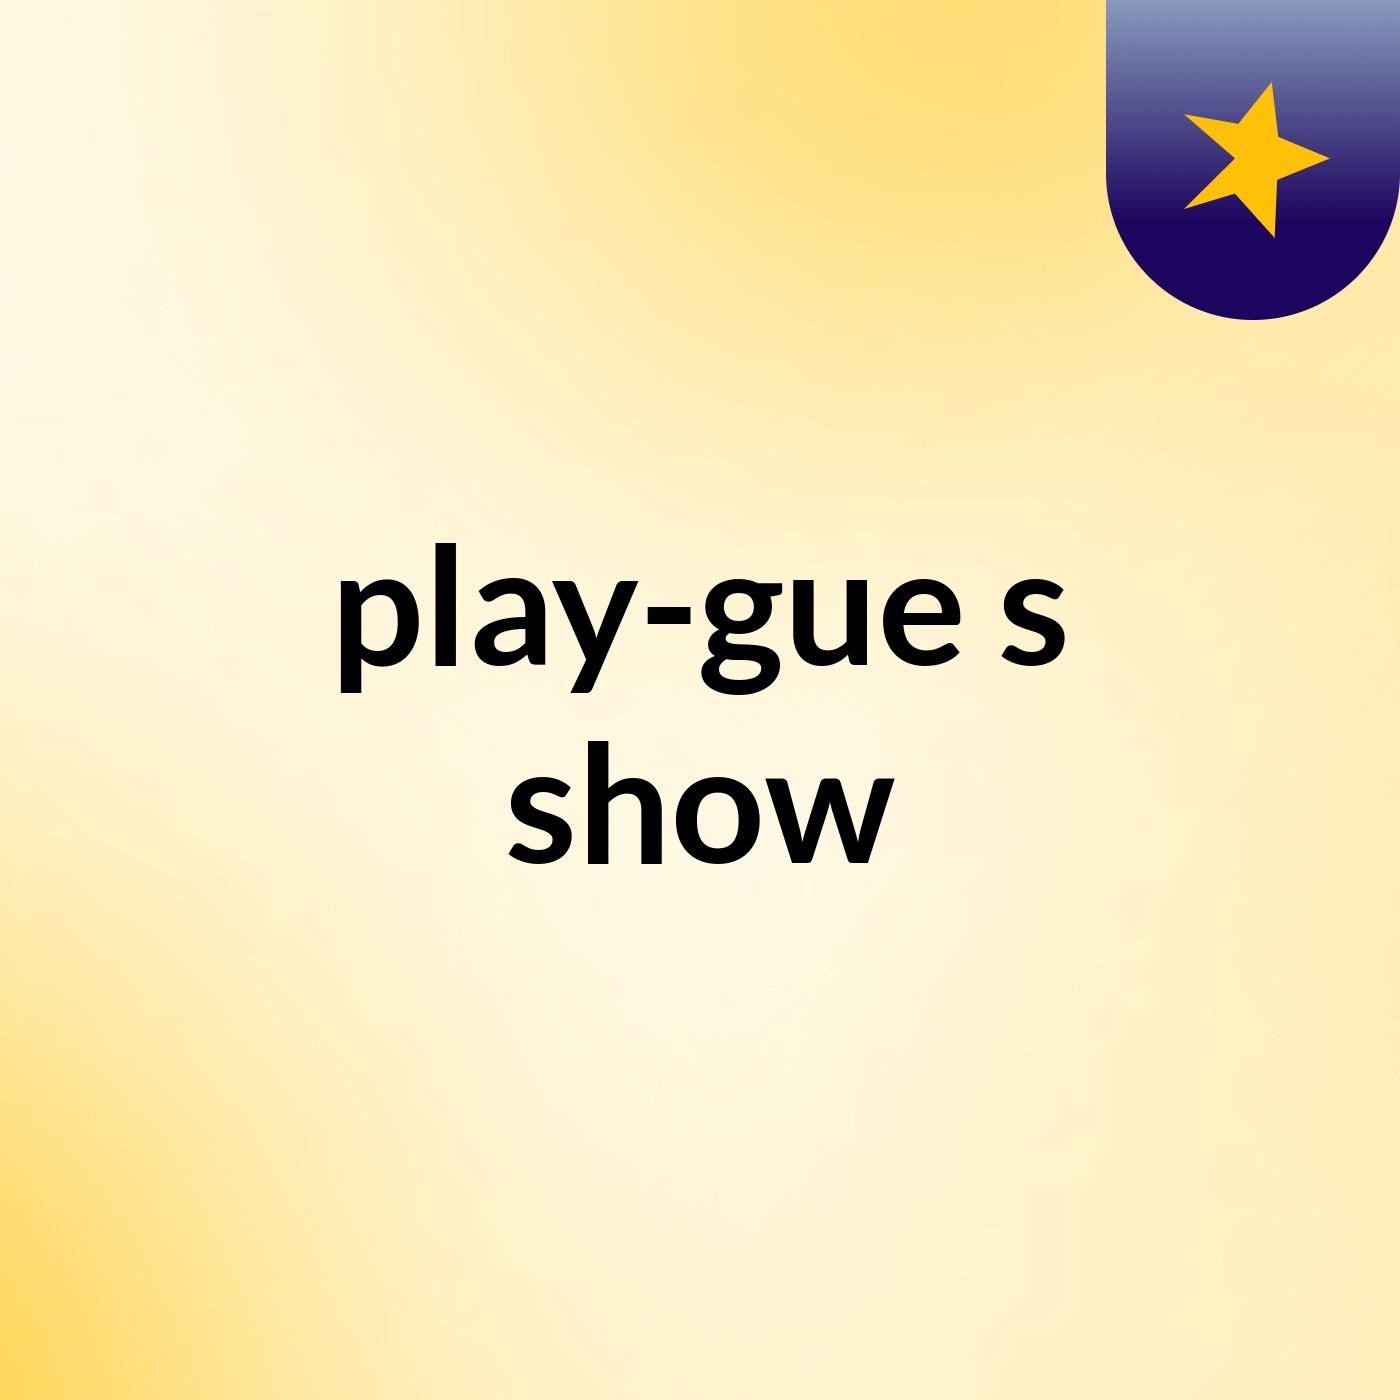 play-gue's show